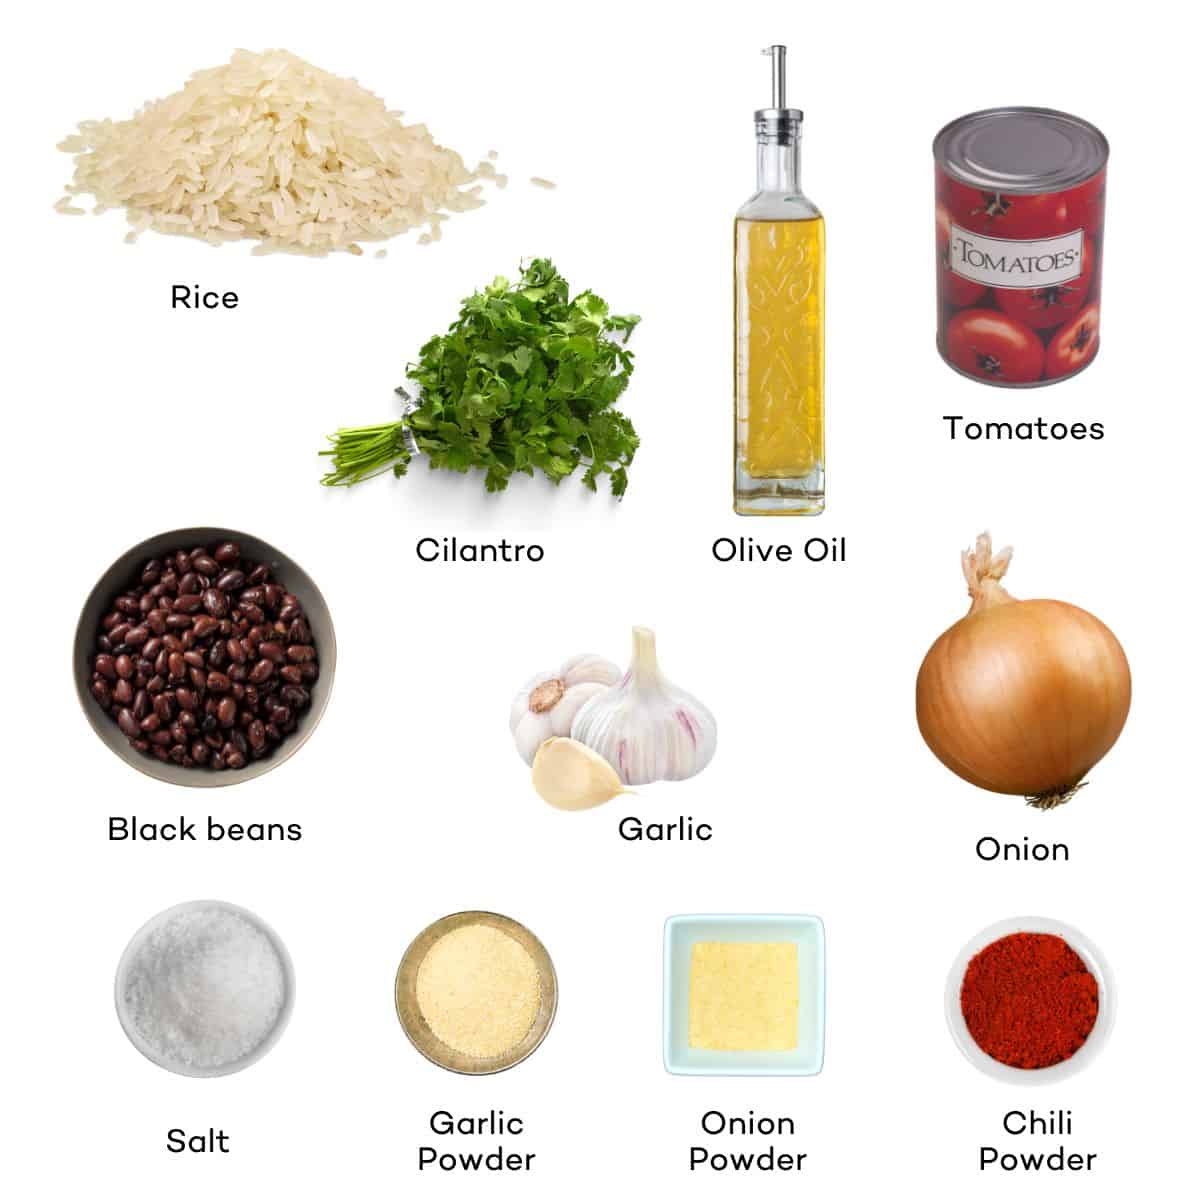 Ingredients for Tomato Rice and Beans - rice, black beans, tomatoes, cilantro, olive oil, garlic, onion, salt, garlic powder, onion powder, chili powder. 